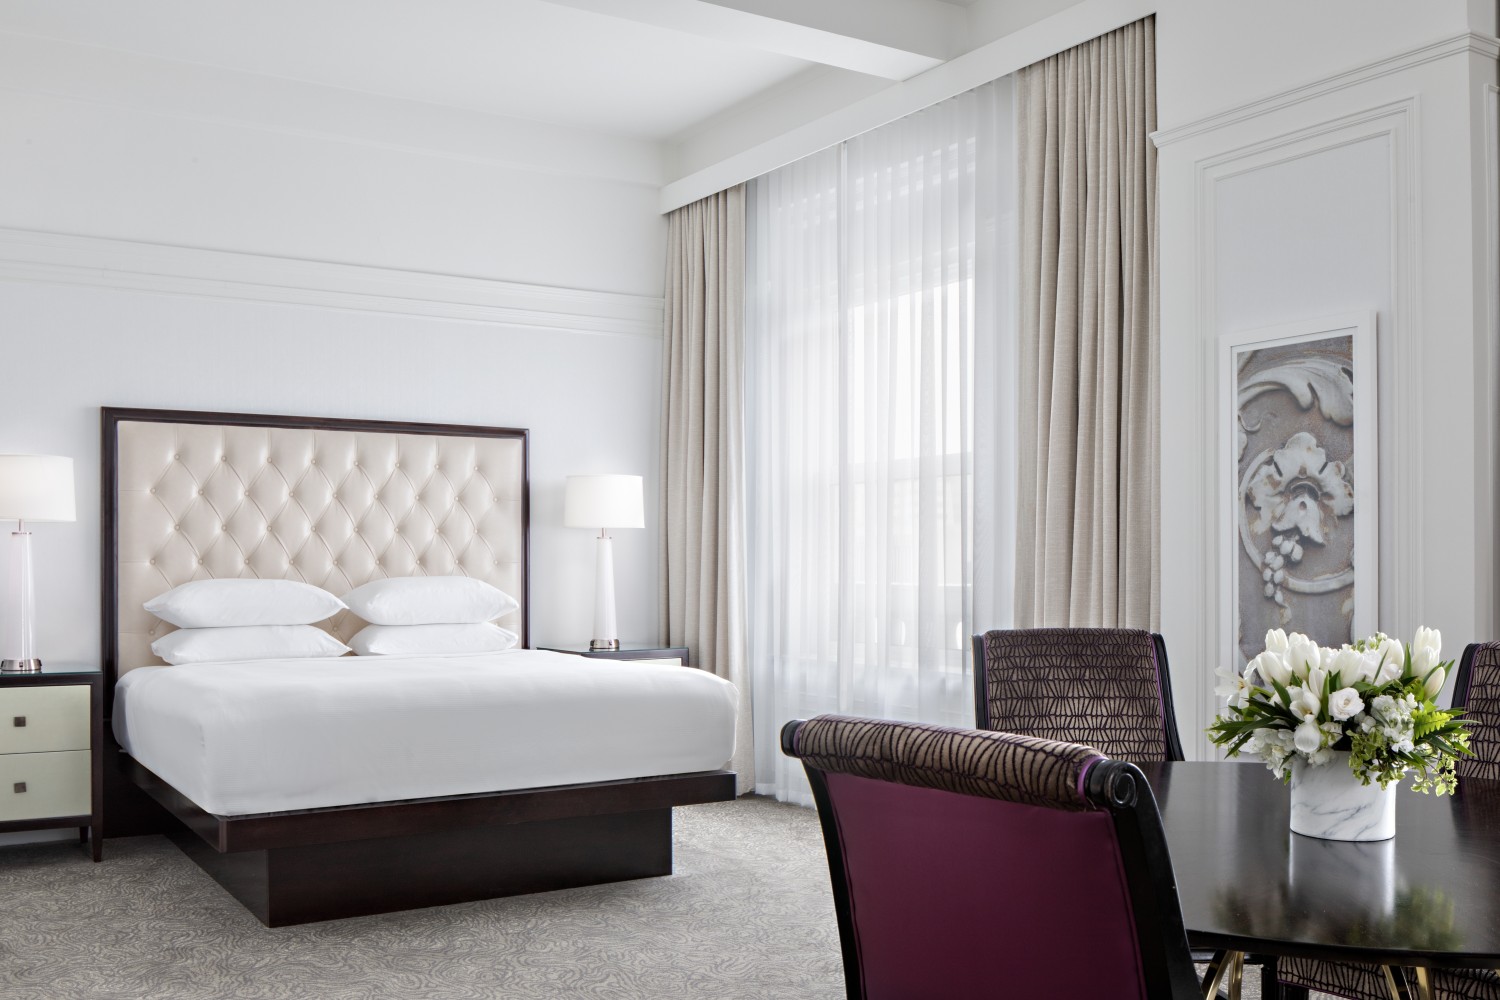 Amway Grand_Junior Suite_Pantlind_King Bed_Tables_Chairs_Window_Lamps